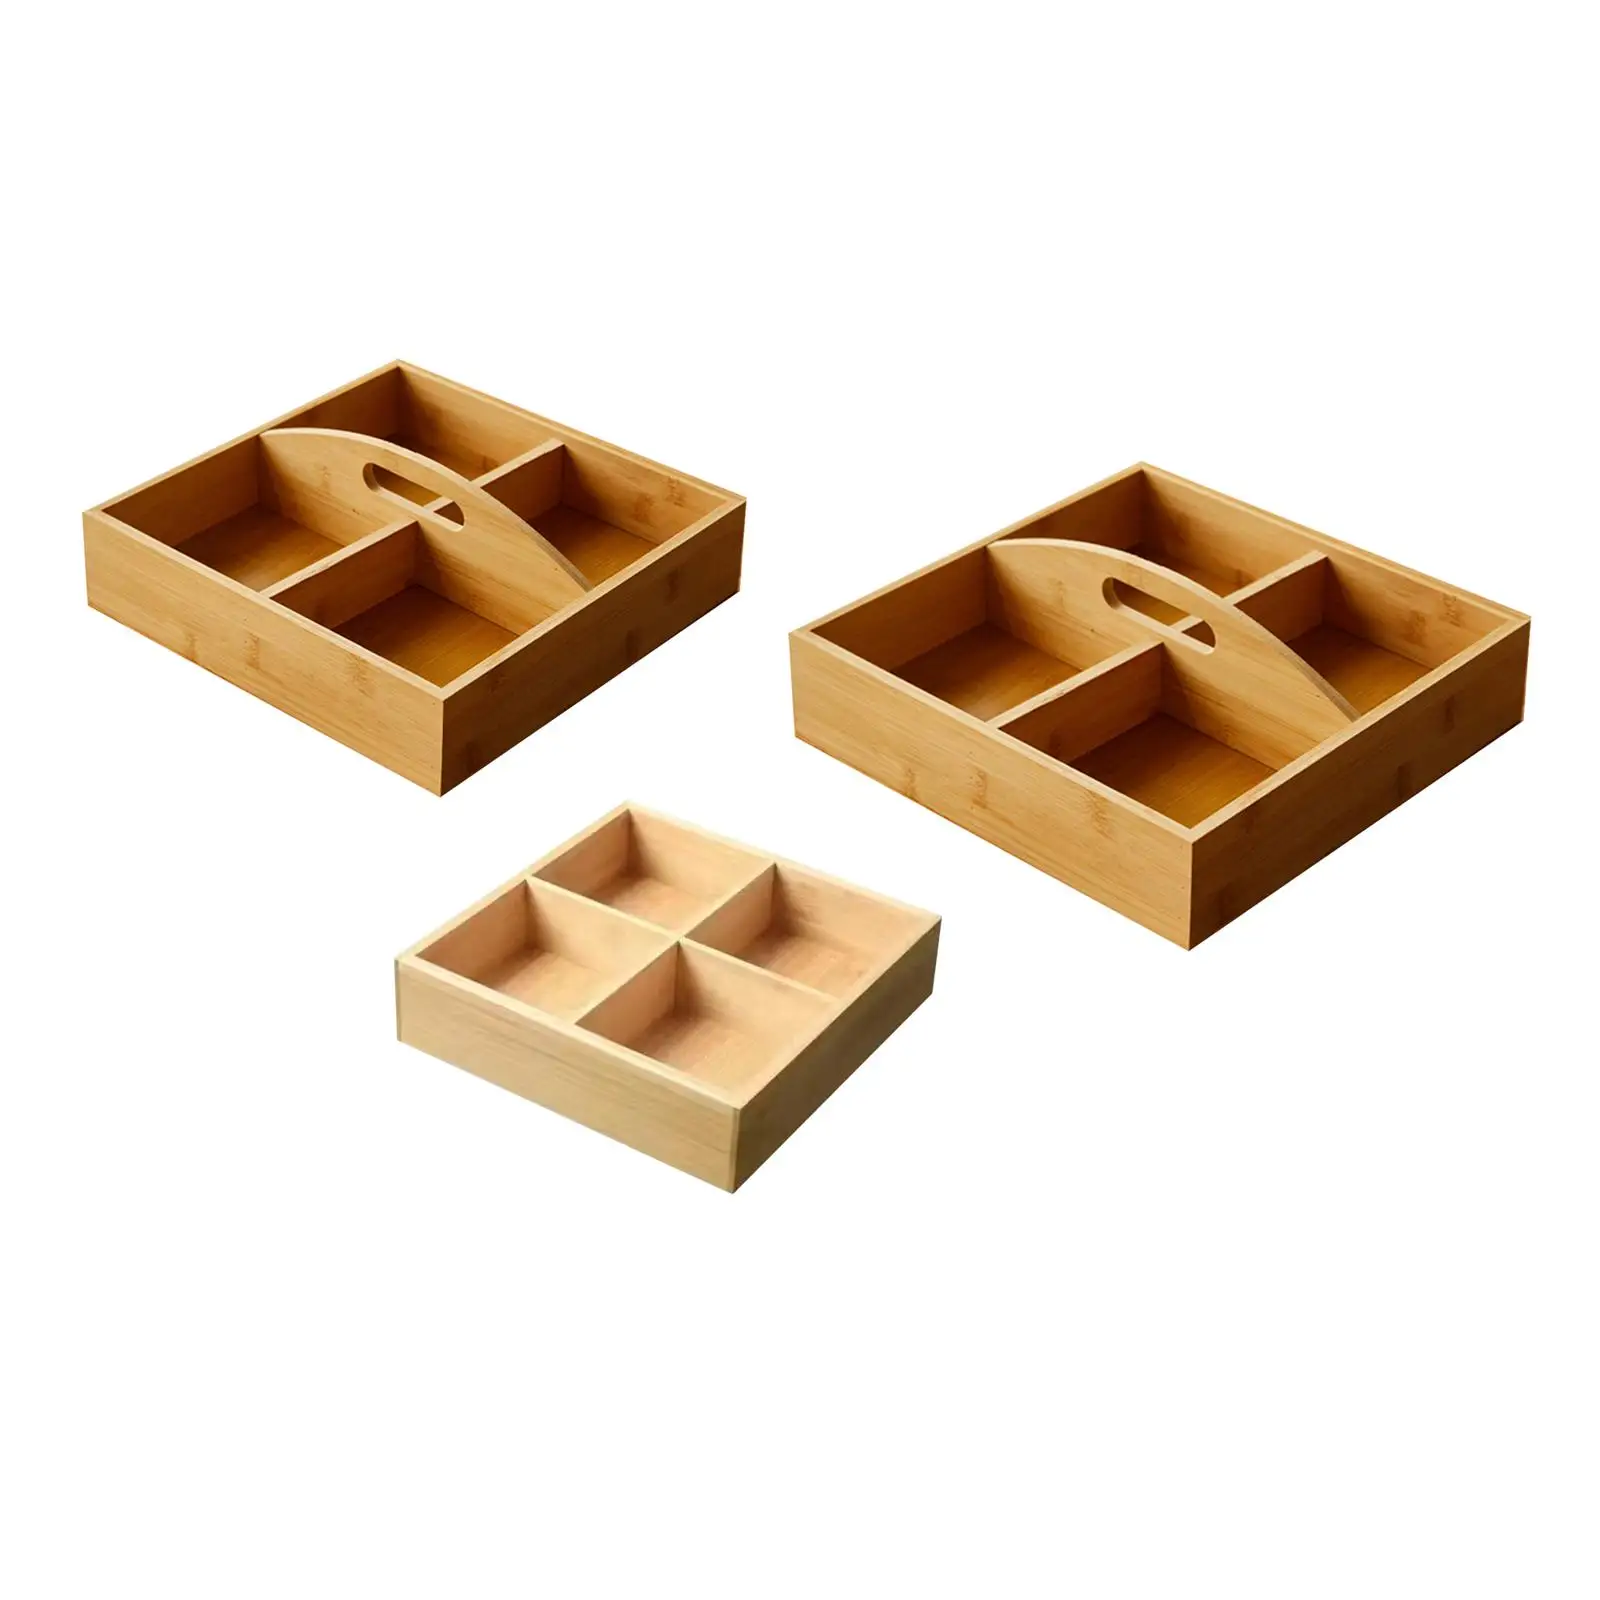 Wooden Dried Fruit Box Snack Tray with 4 Compartments for Homes, Restaurants, Office Parties, Banquet Facilities Versatile